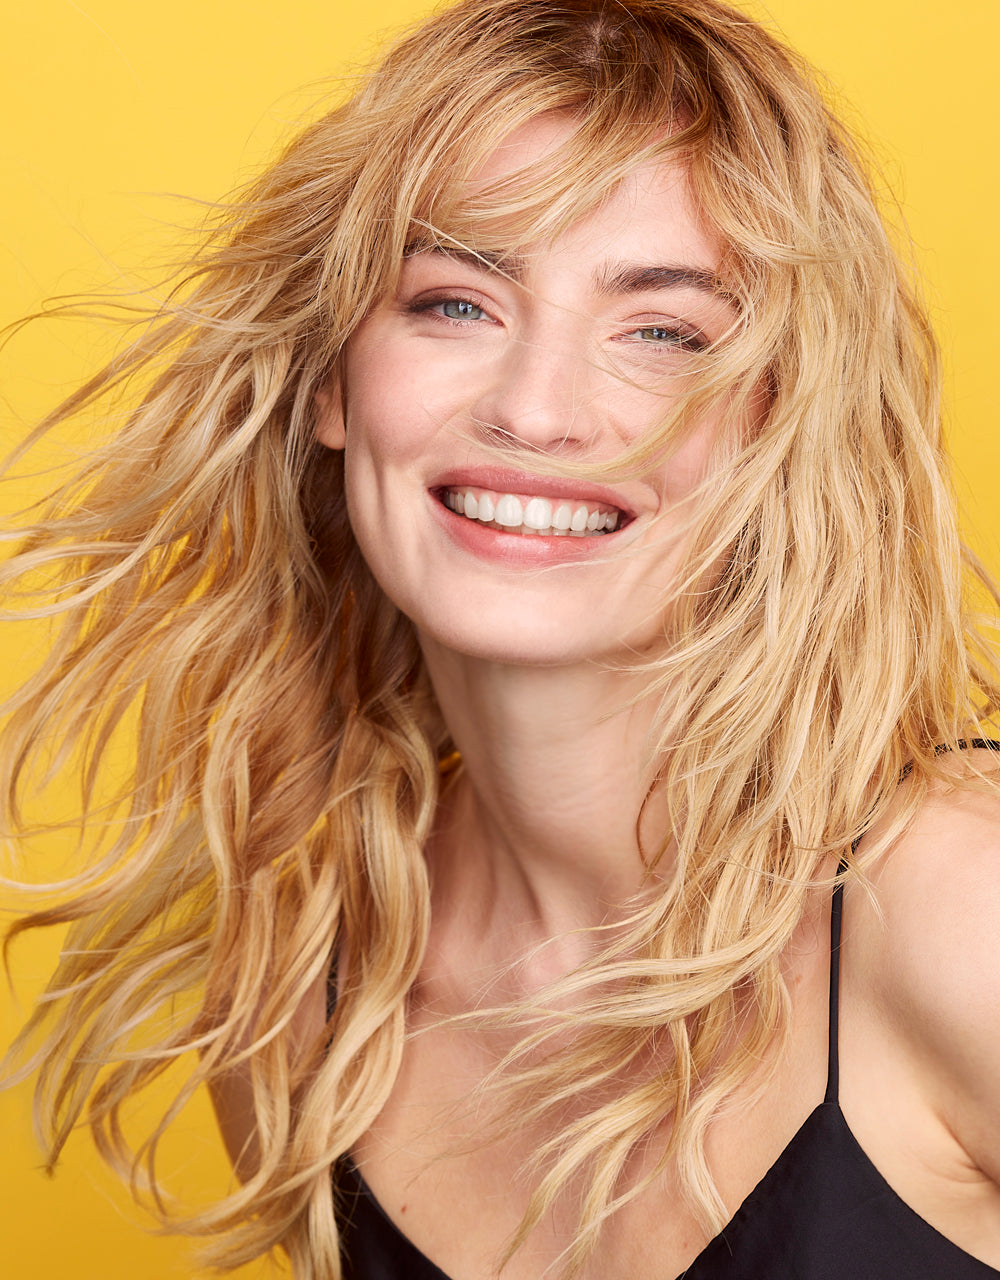 SUMMER-PROOF YOUR HAIR